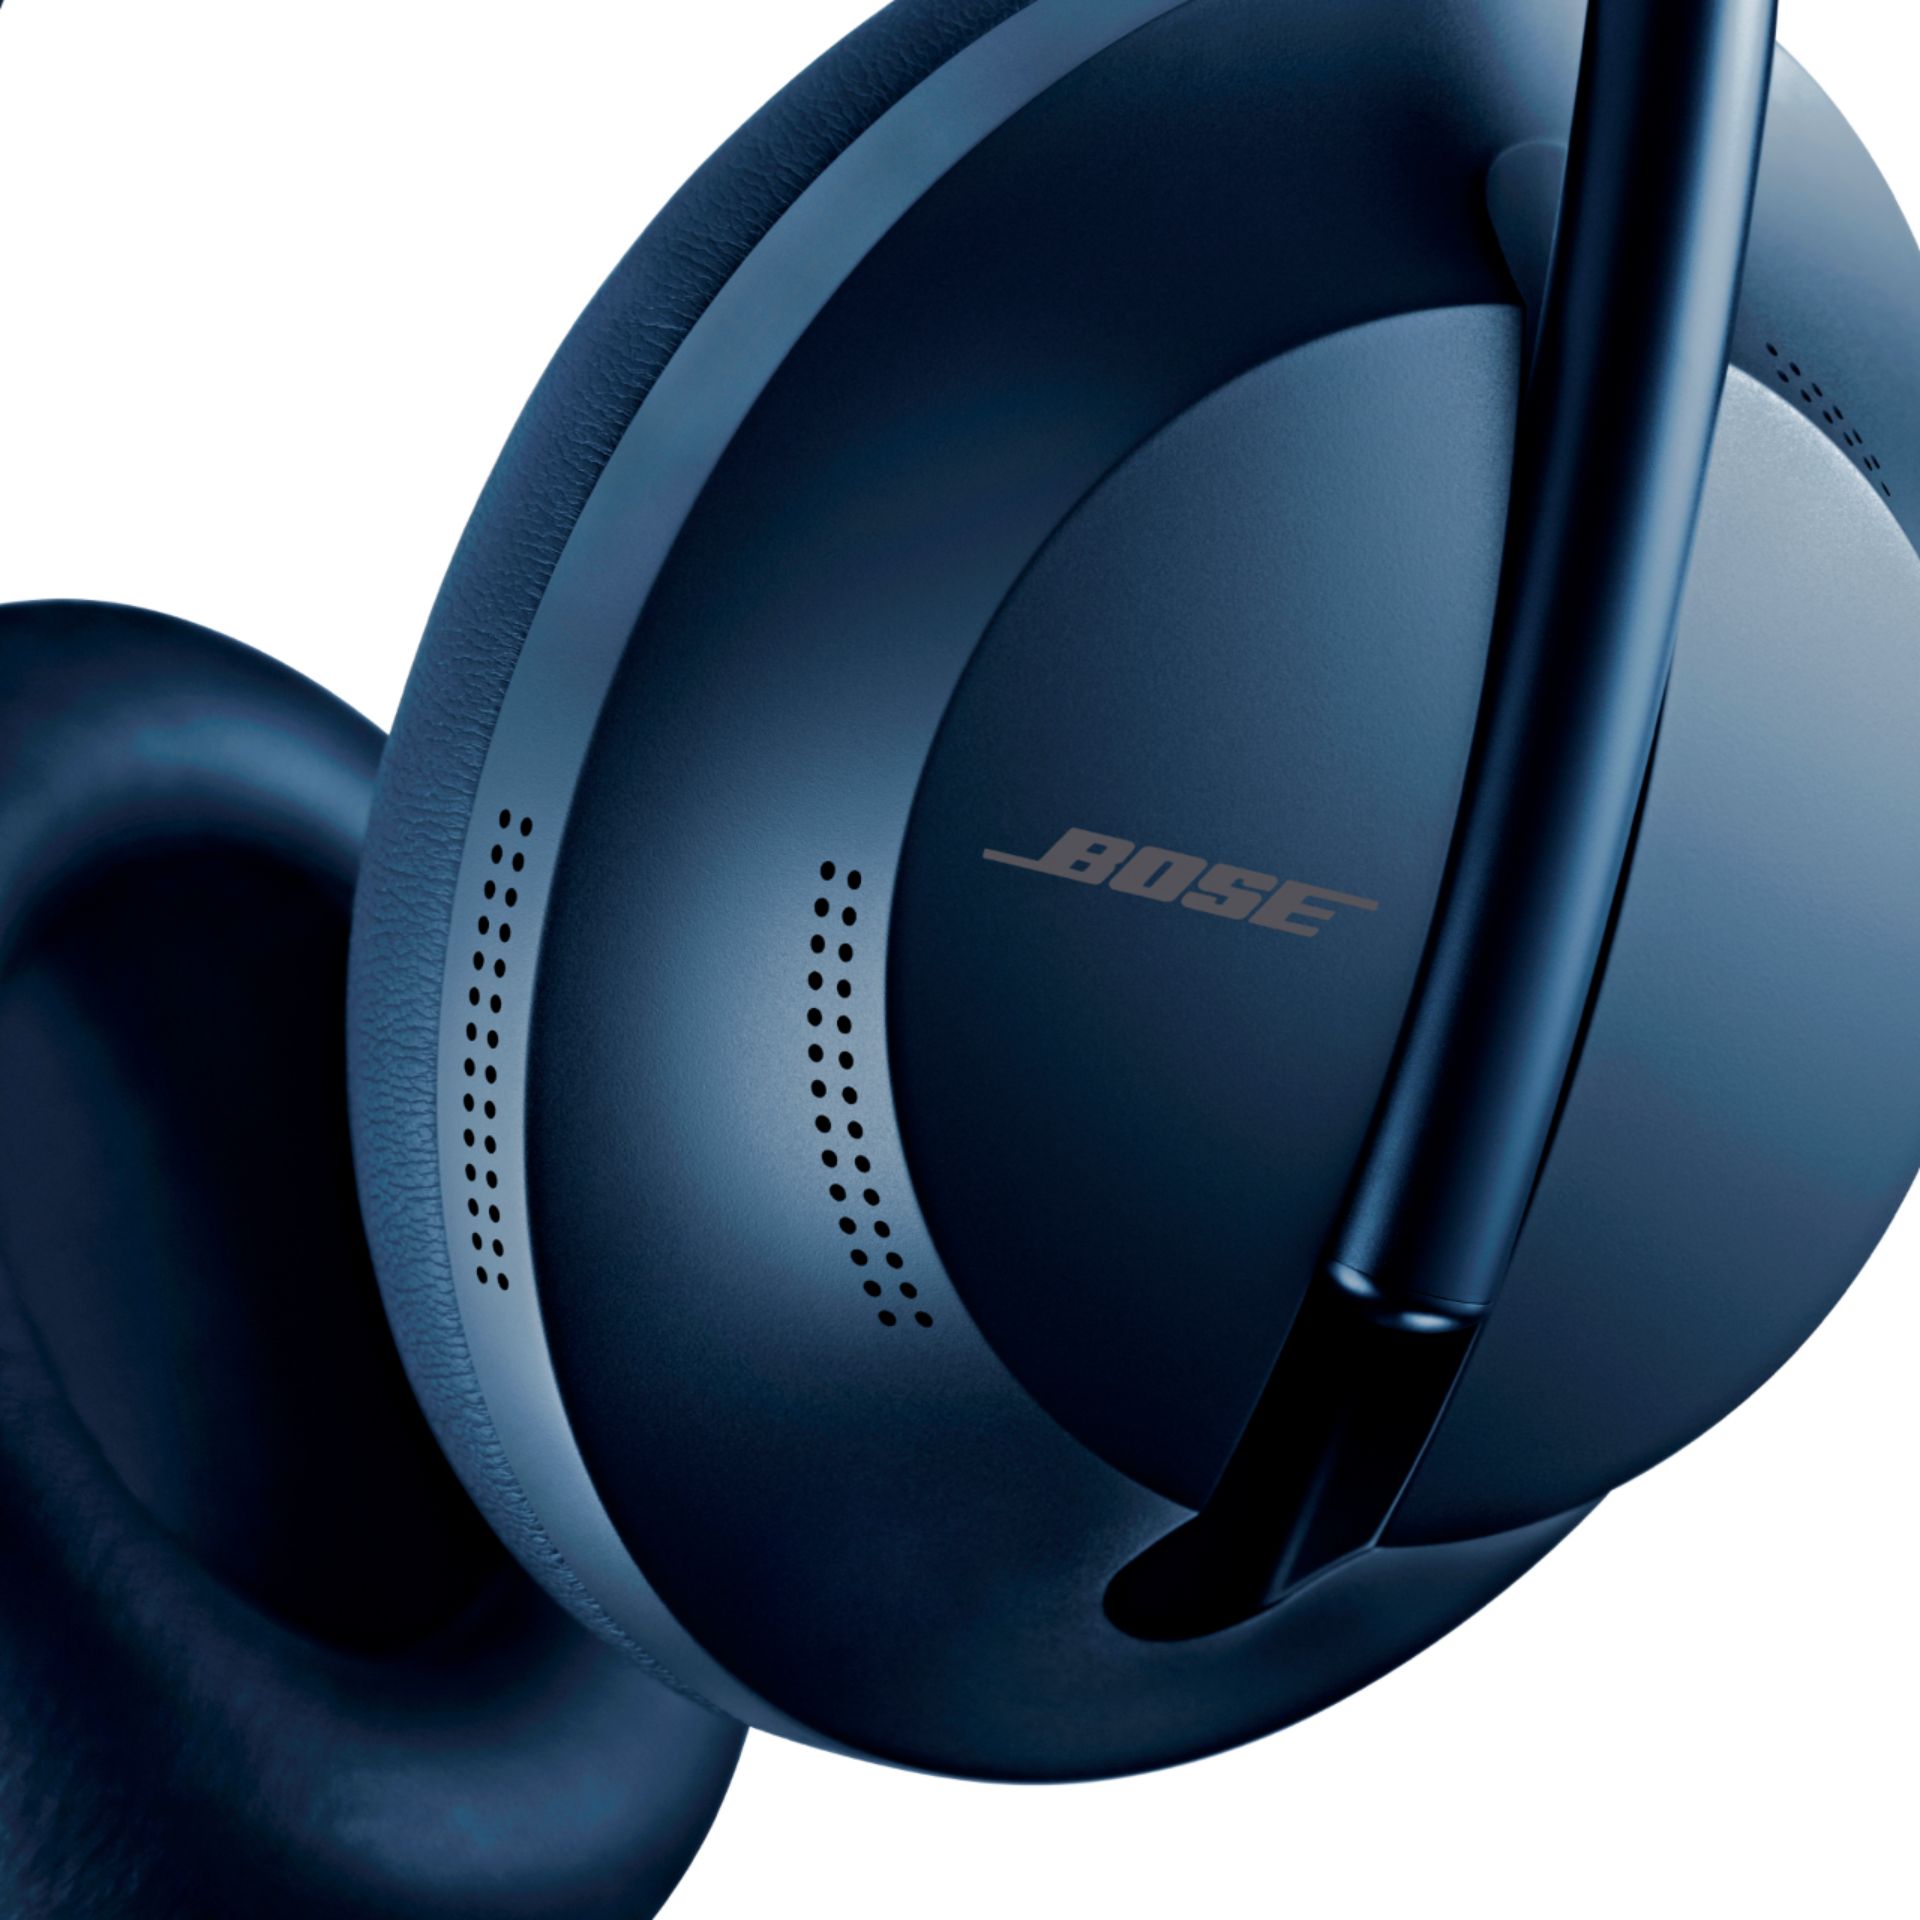 Best Buy: Bose Headphones 700 Wireless Noise Cancelling Over-the